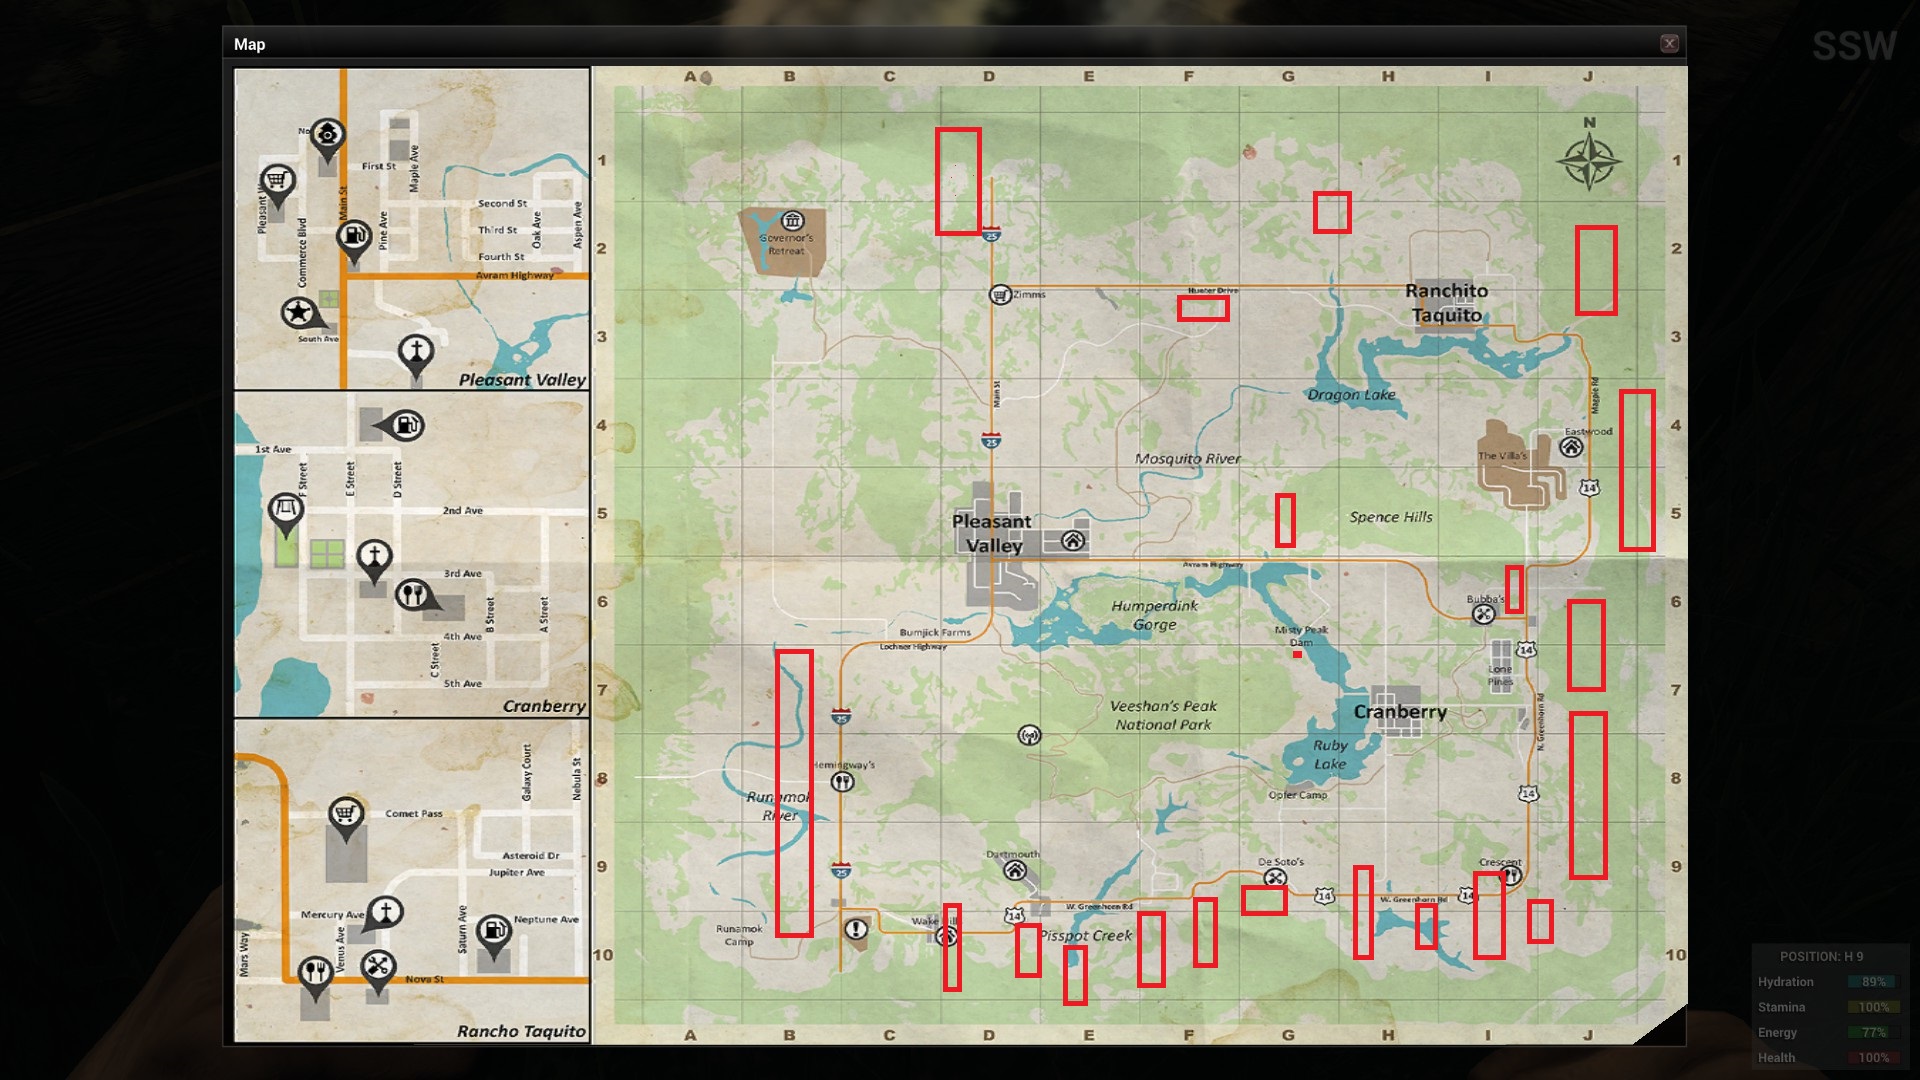         - H1Z1 map.